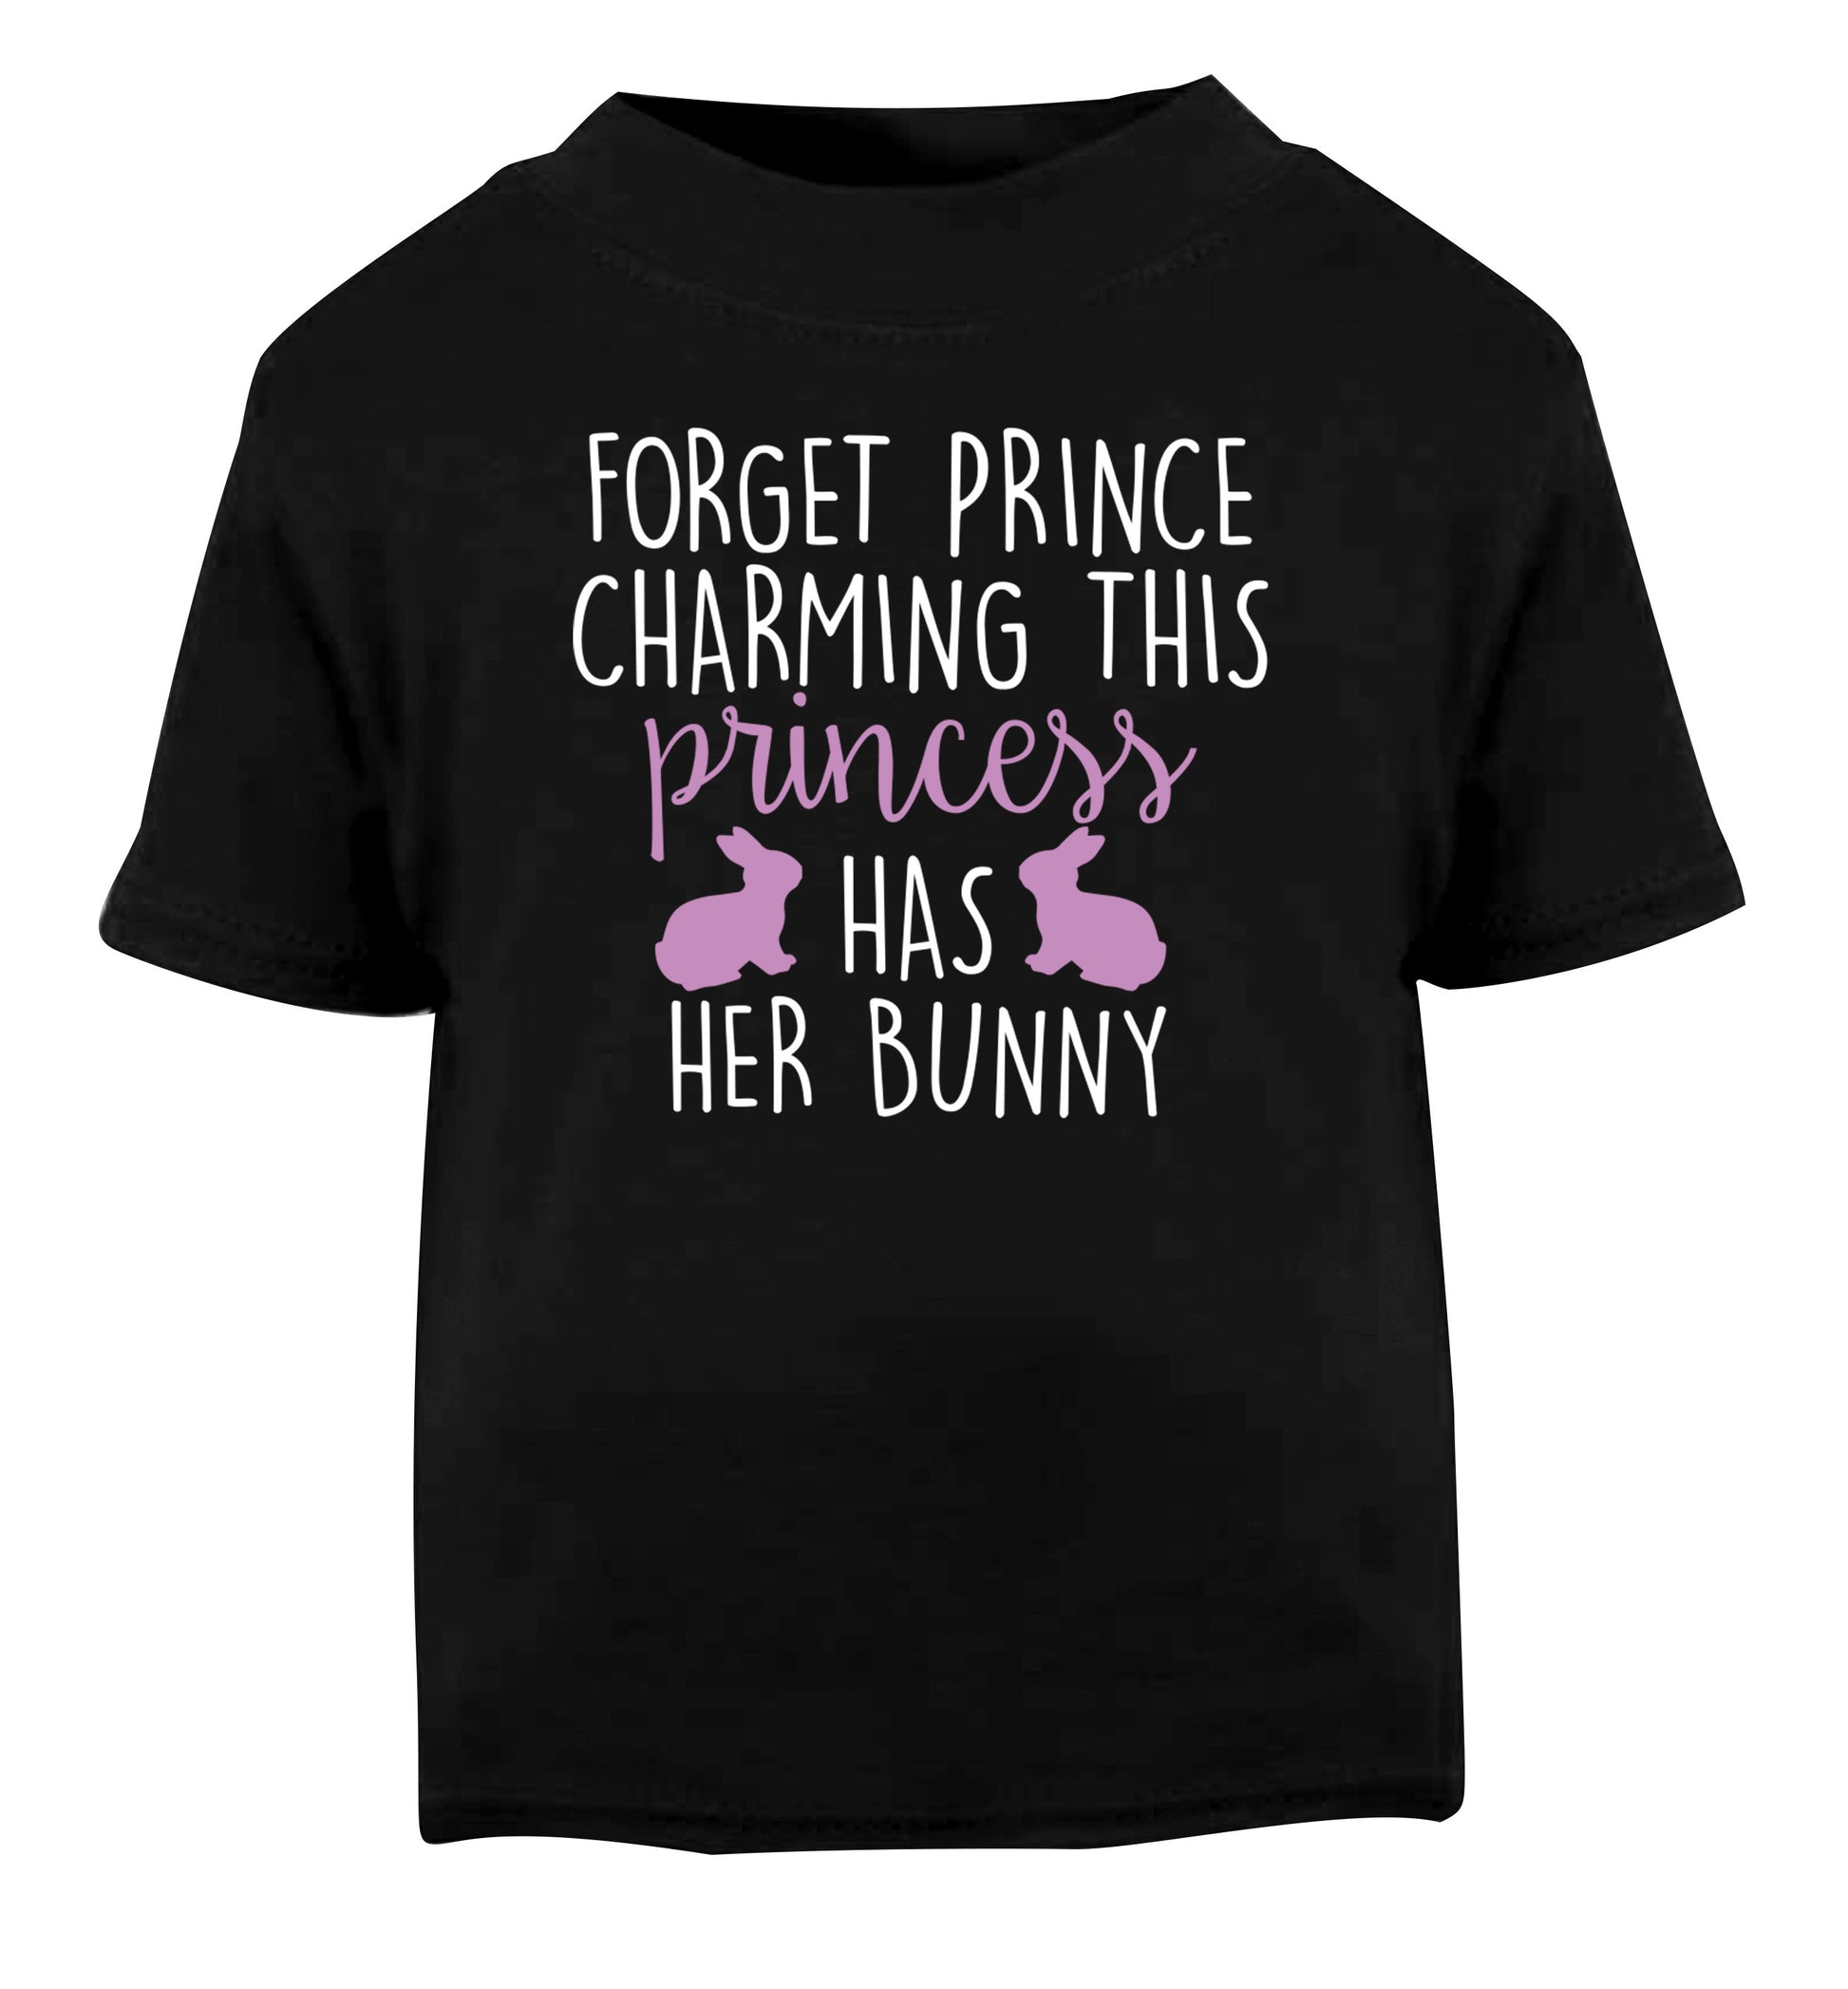 Forget prince charming this princess has her bunny Black Baby Toddler Tshirt 2 years